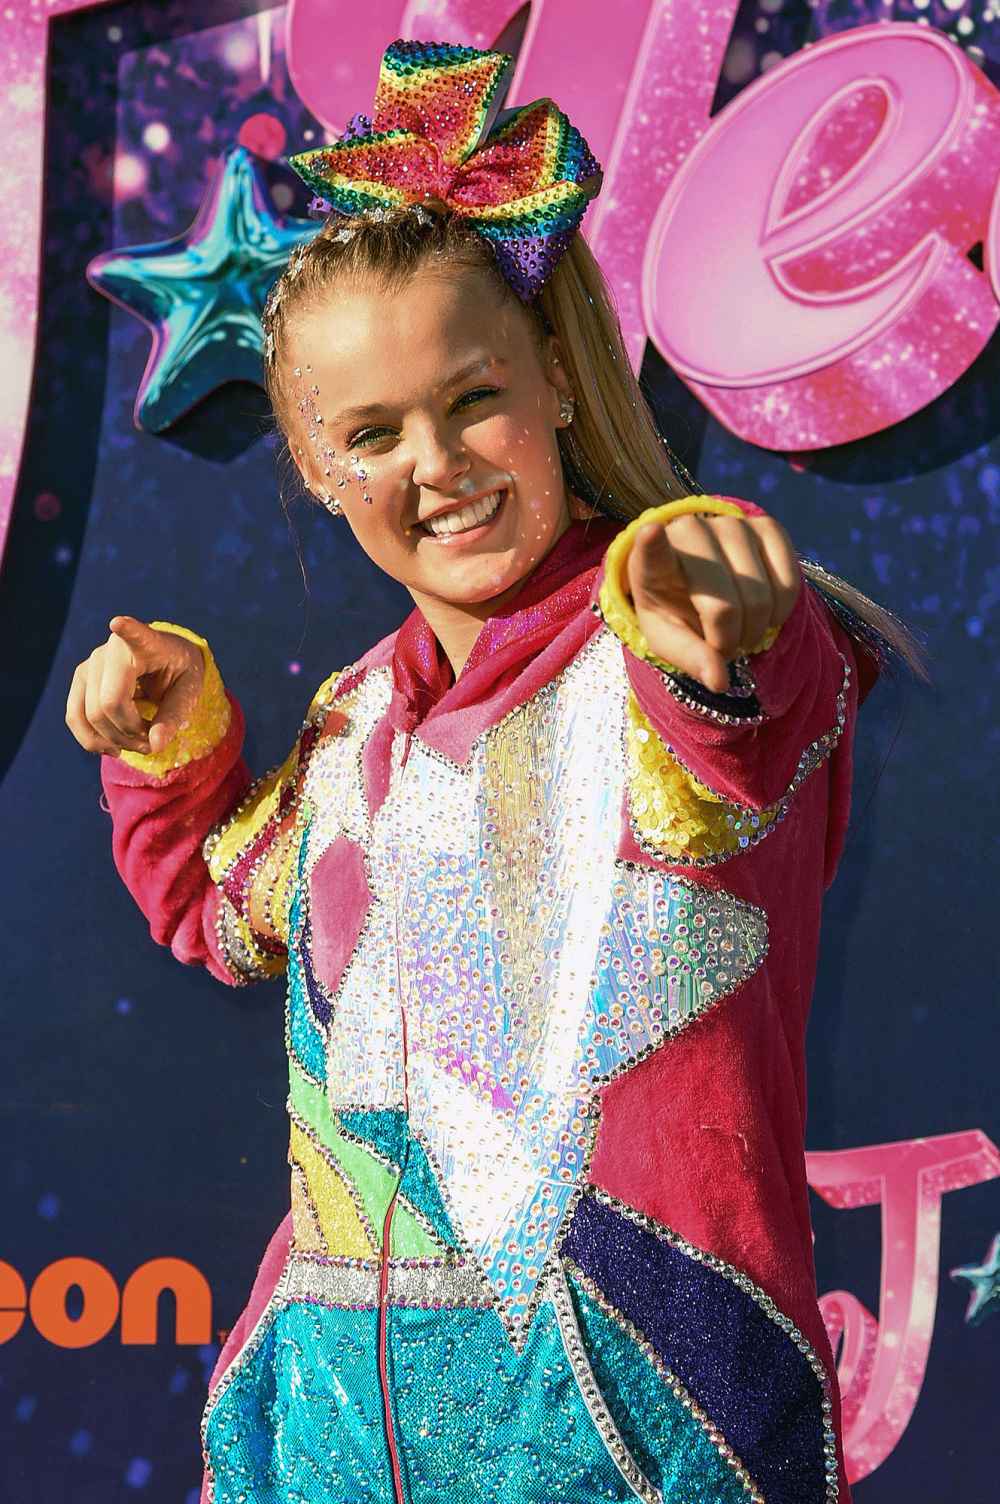 JoJo Siwa Claims Nickelodeon Won’t Let Her Perform Certain Songs on Tour